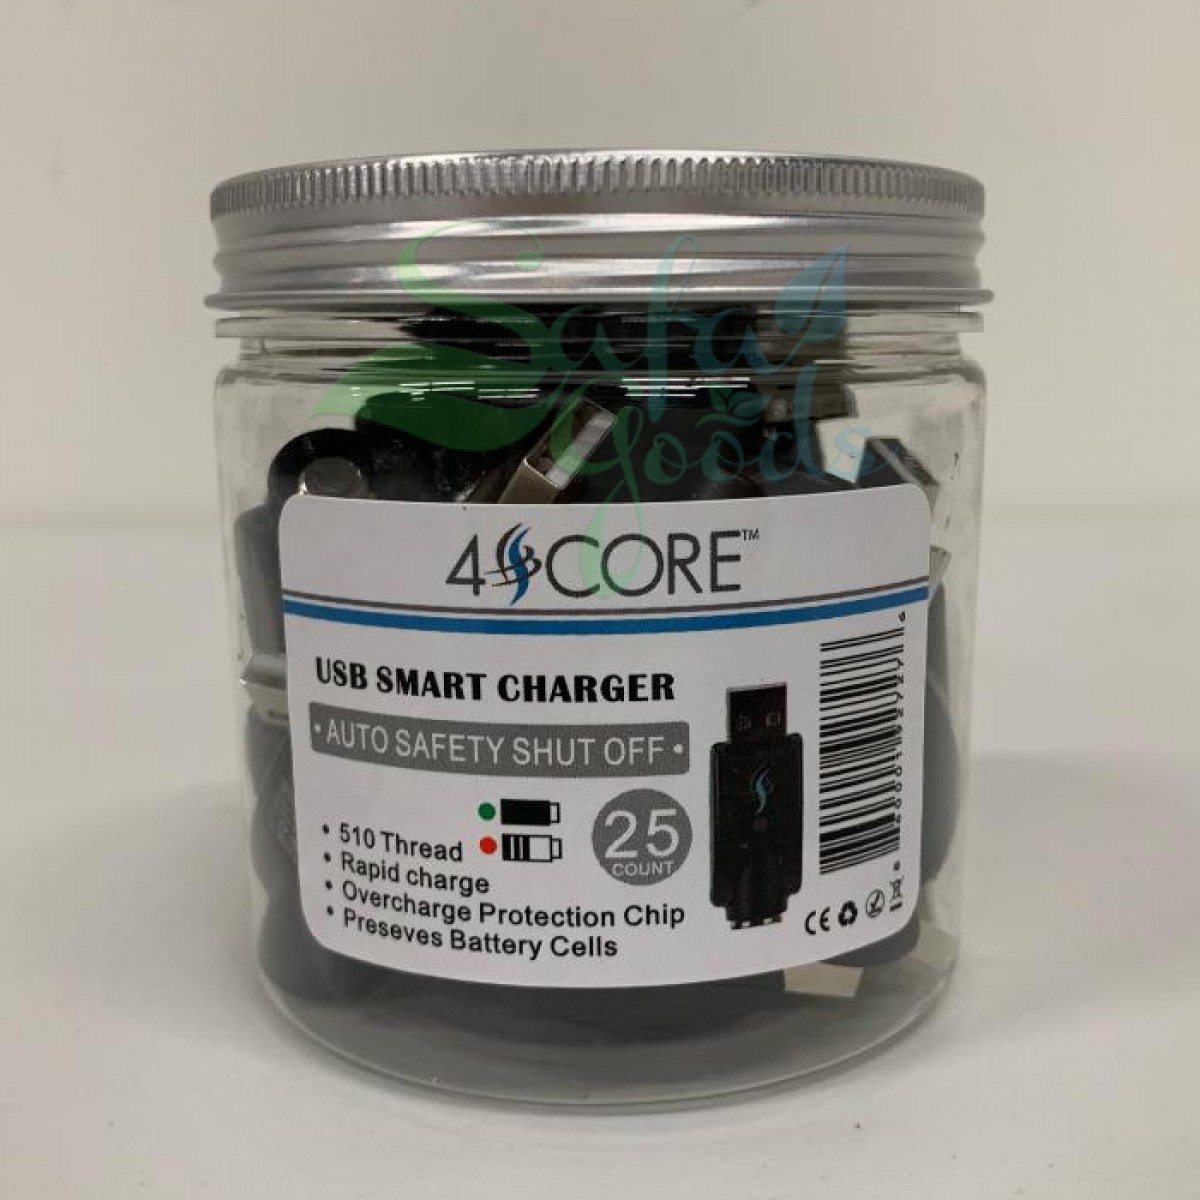 4Score USB Chargers 25ct